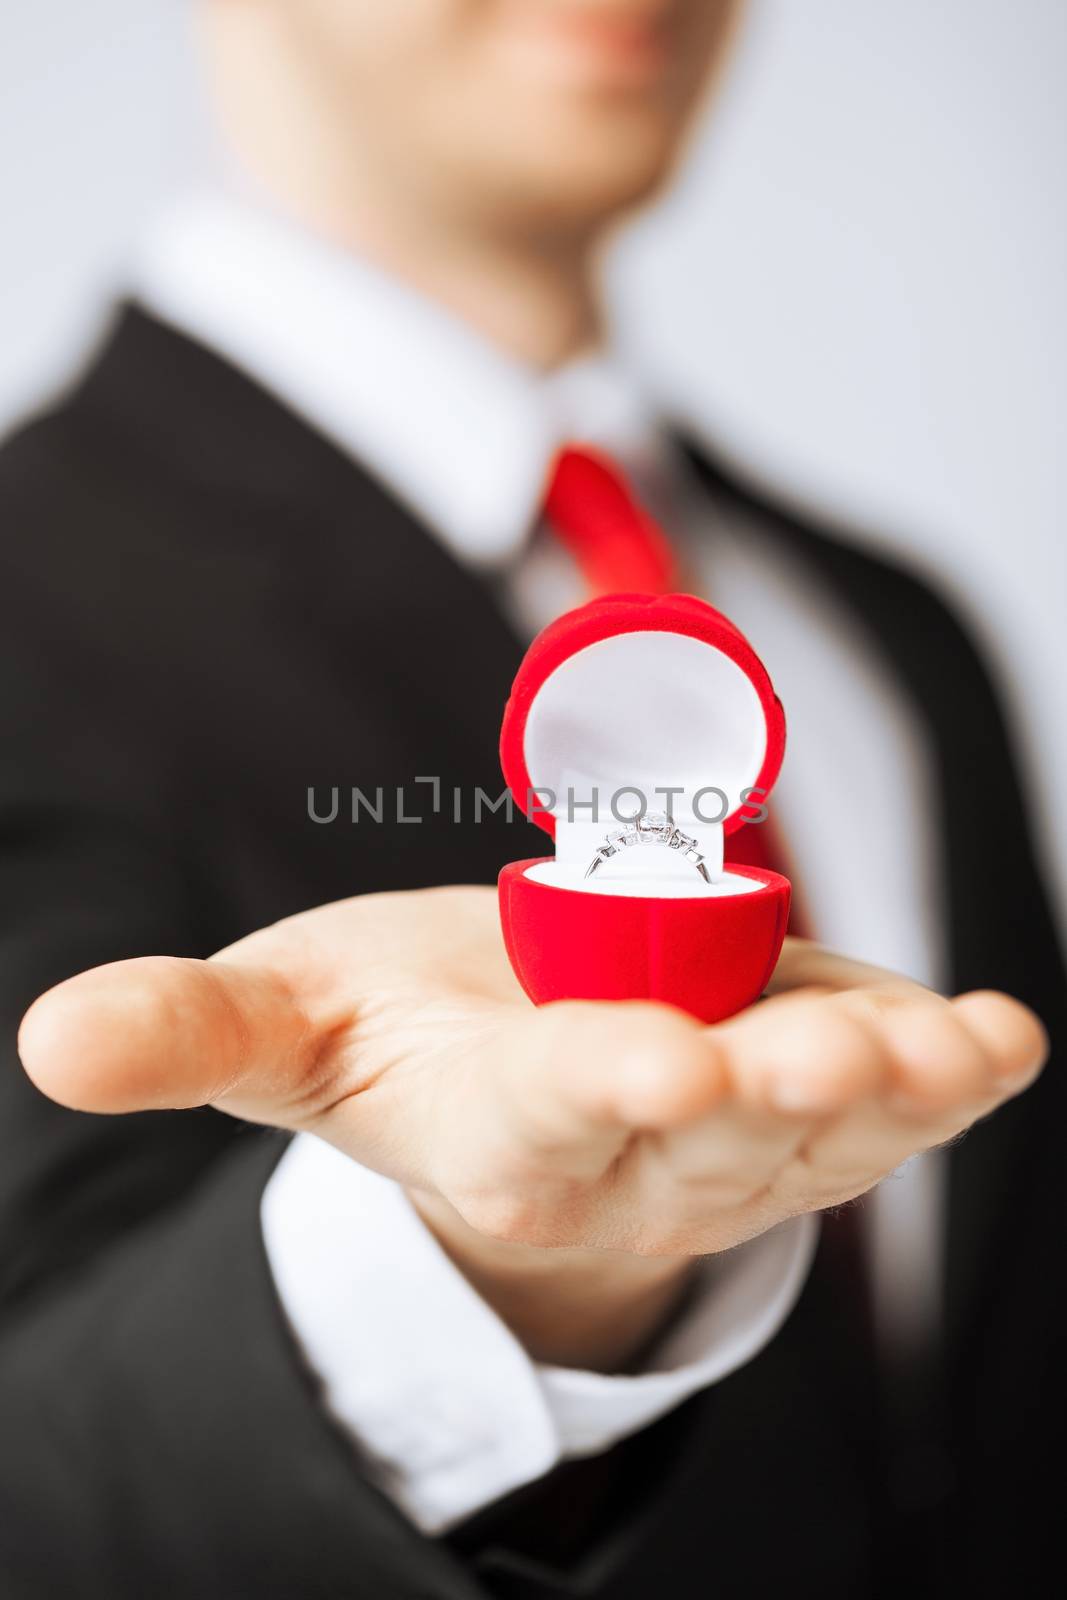 man making proposal with wedding ring and gift box.